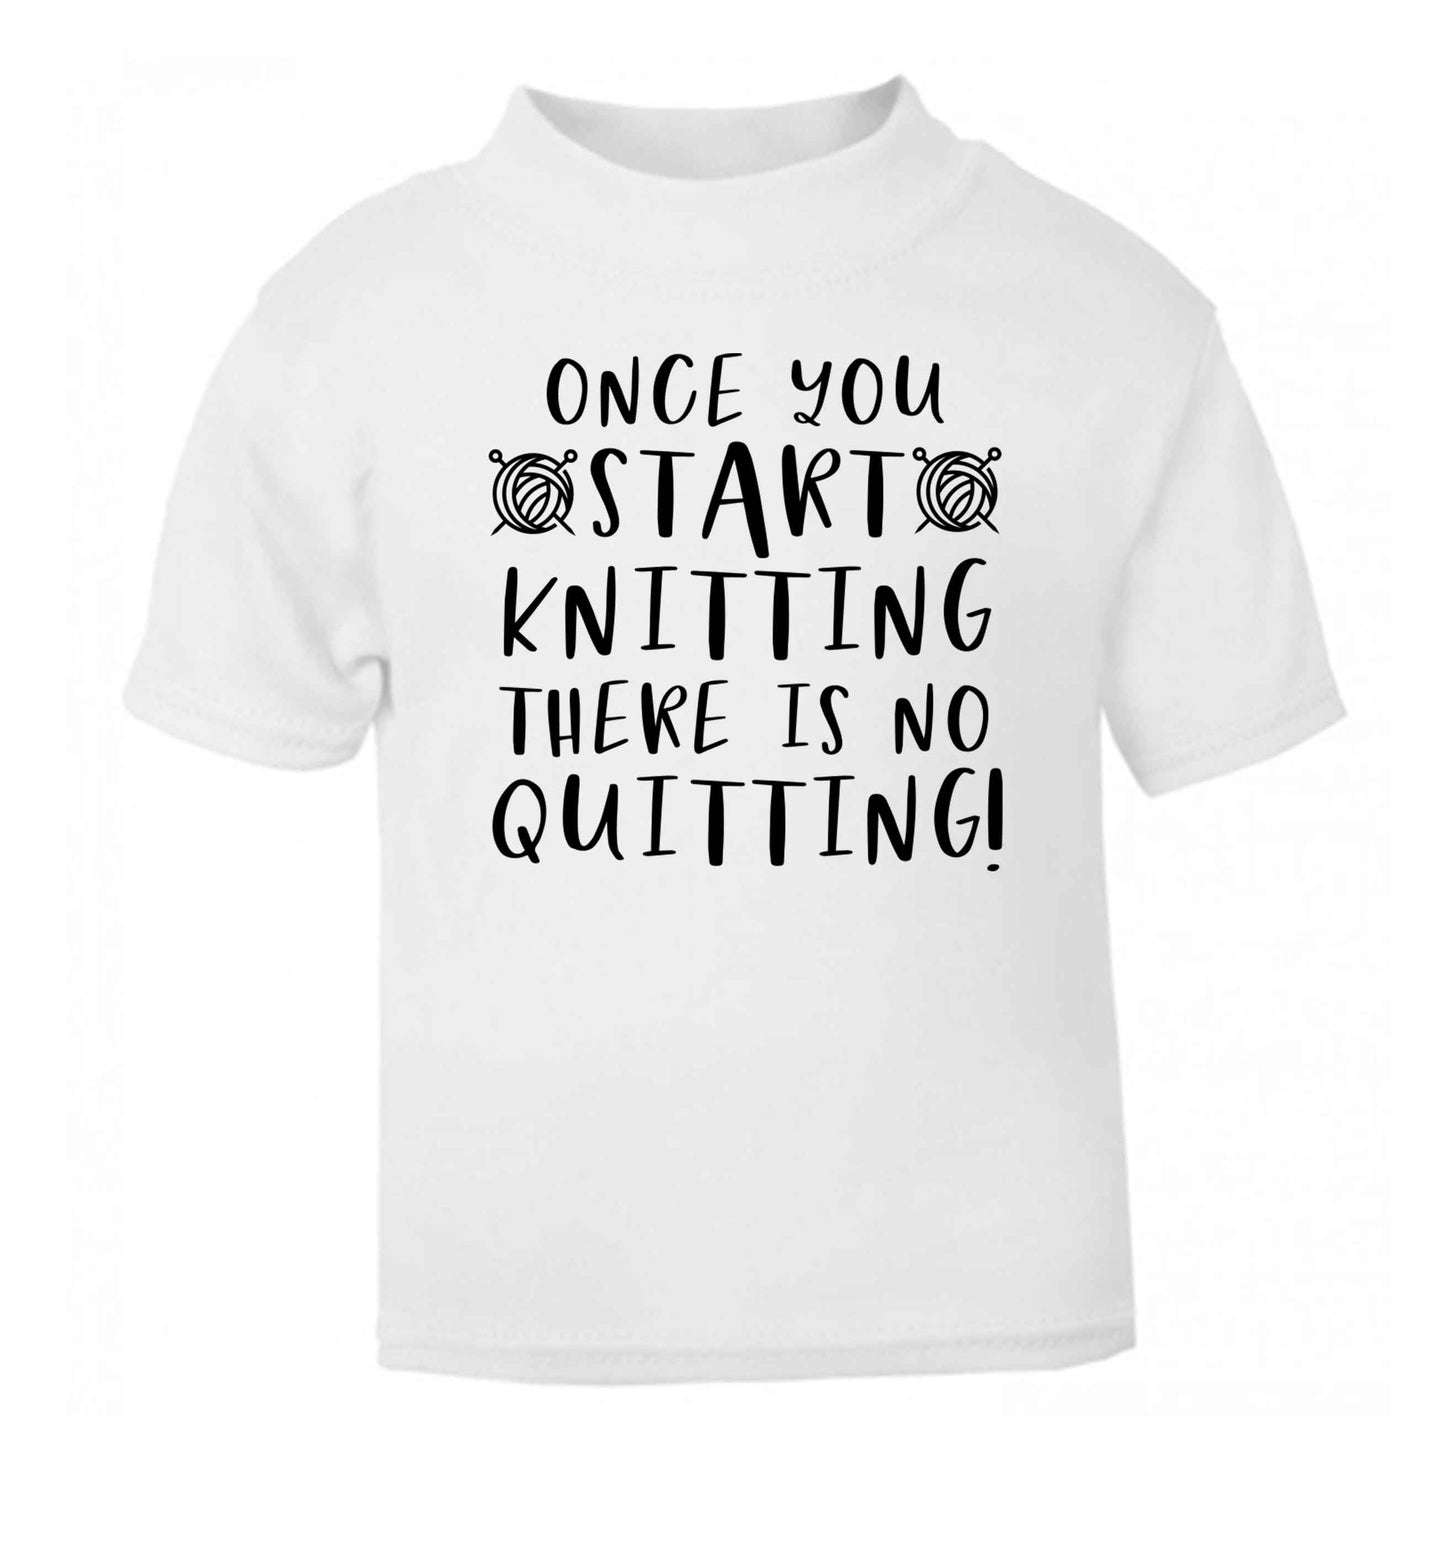 Once you start knitting there is no quitting! white Baby Toddler Tshirt 2 Years